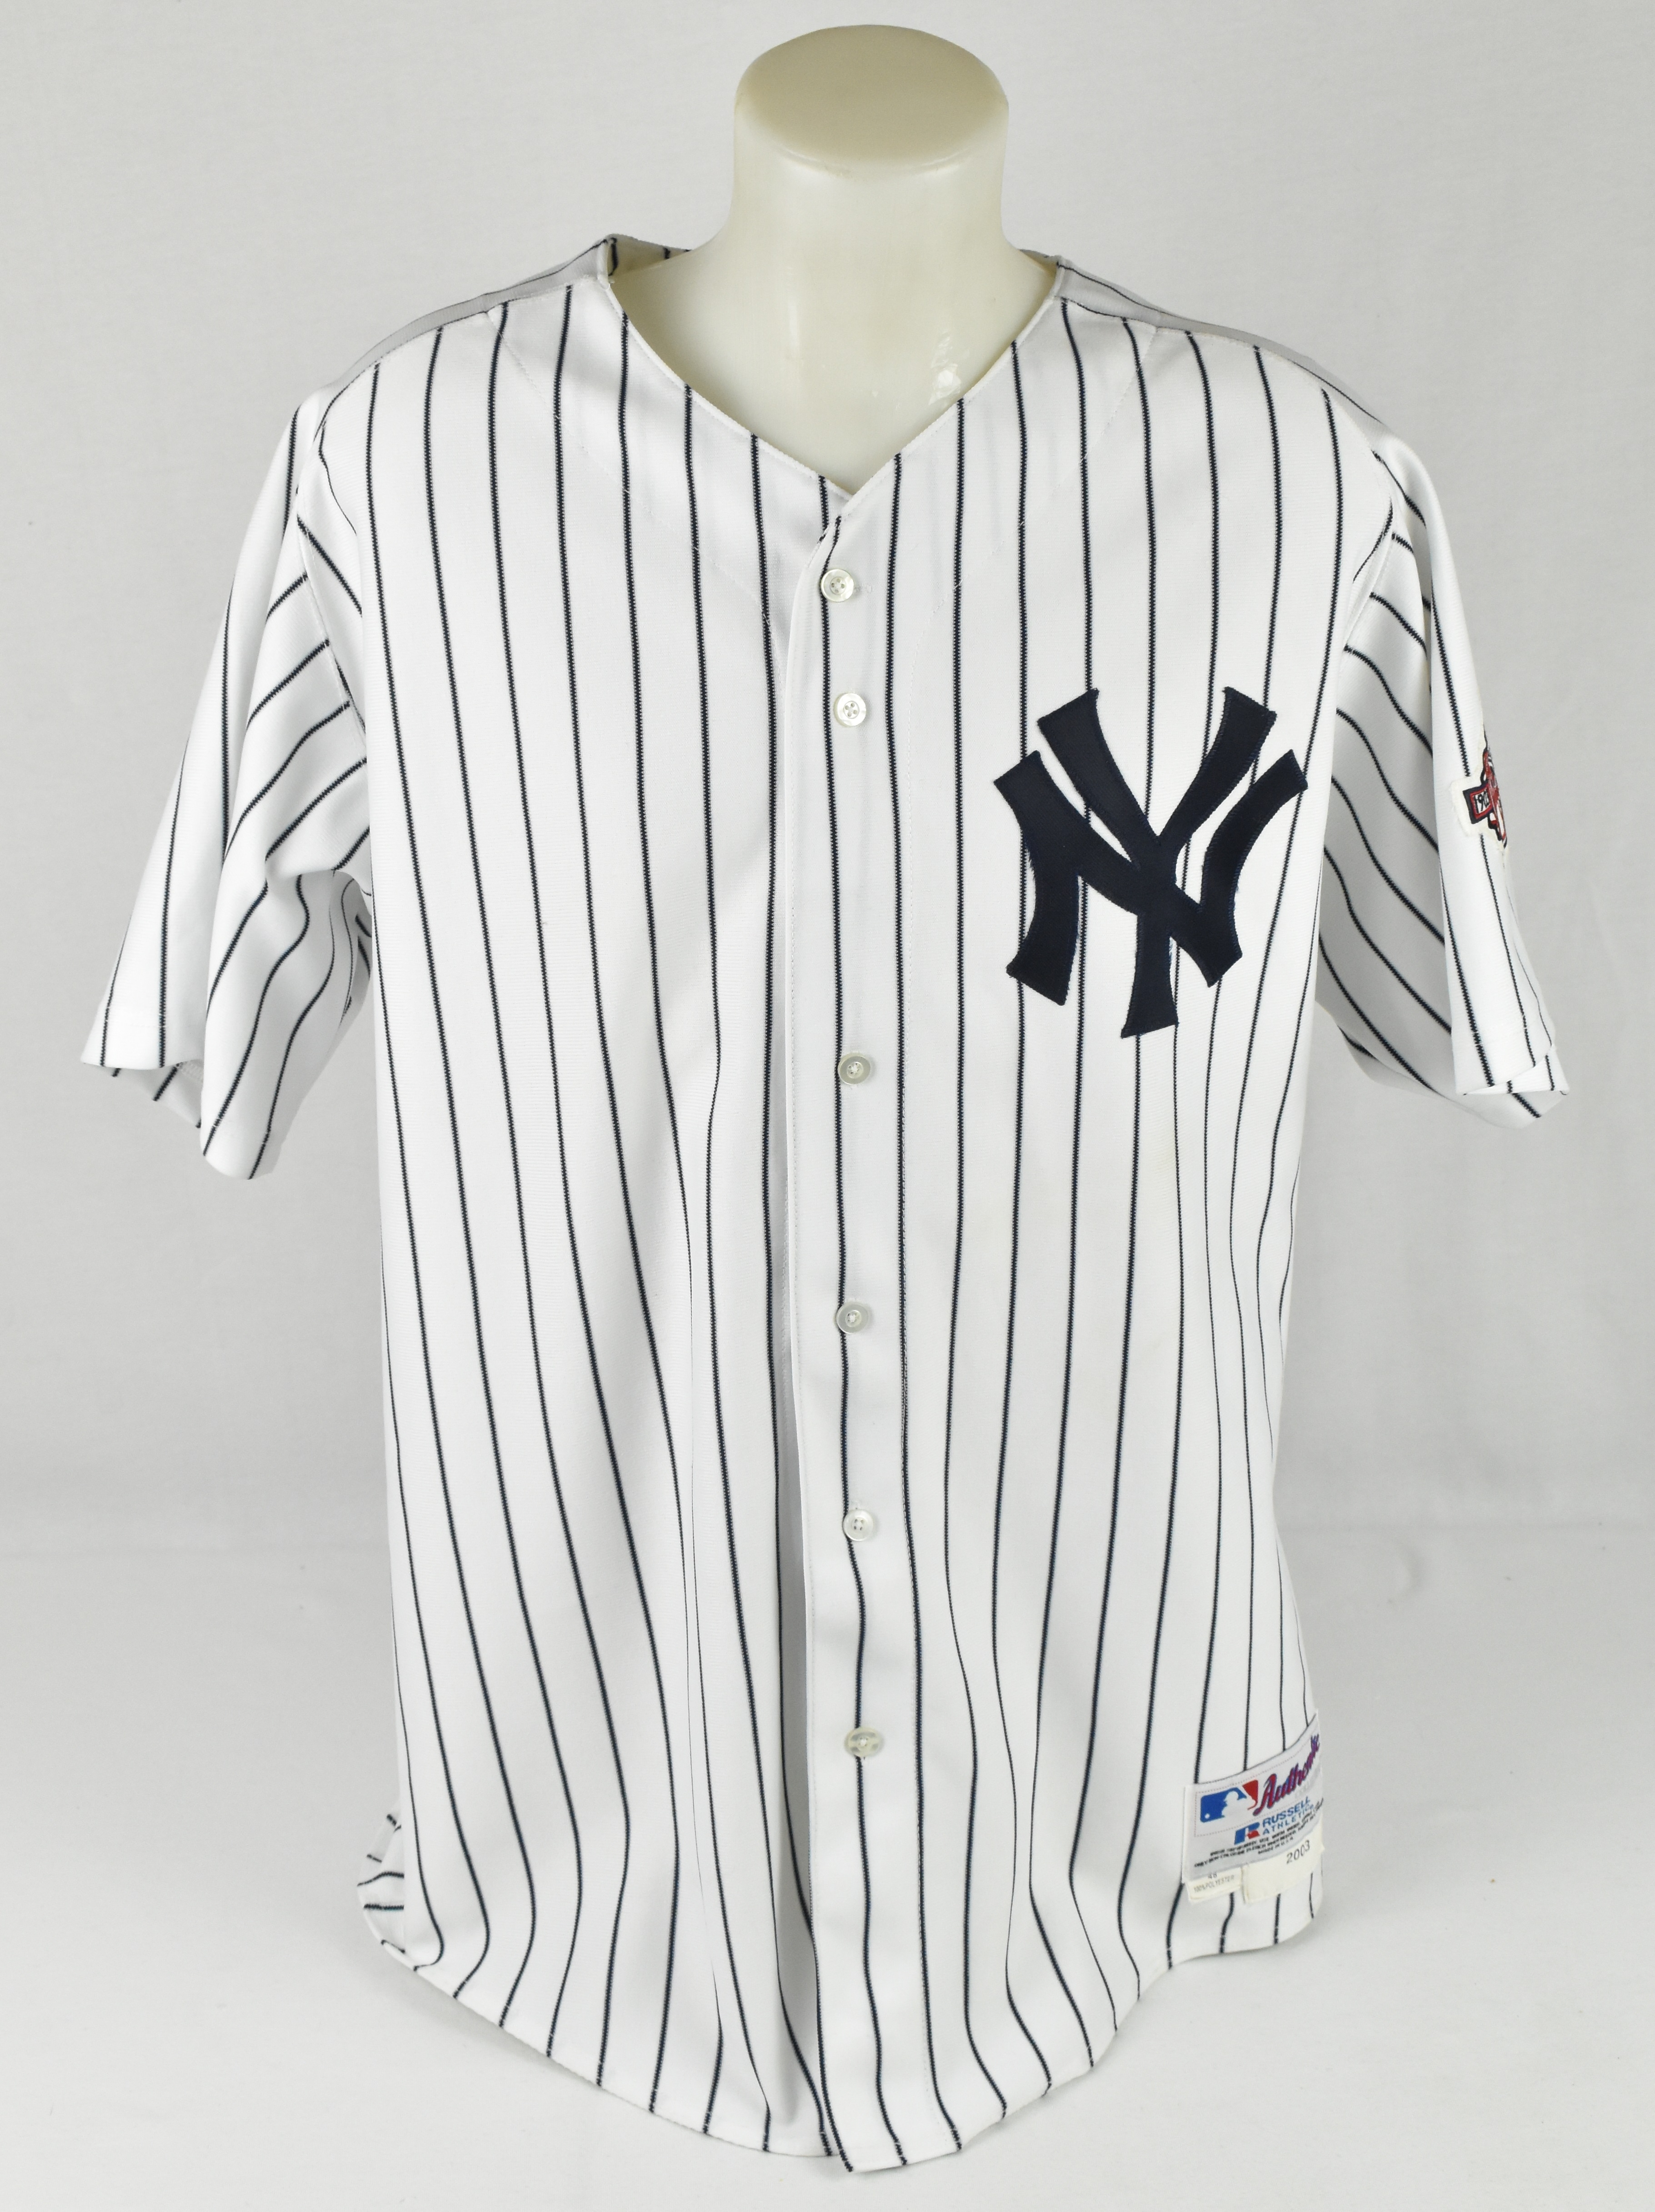 DEREK JETER Authentic Russell Athletic NEW YORK YANKEES Pin 01 Flag Jersey  40